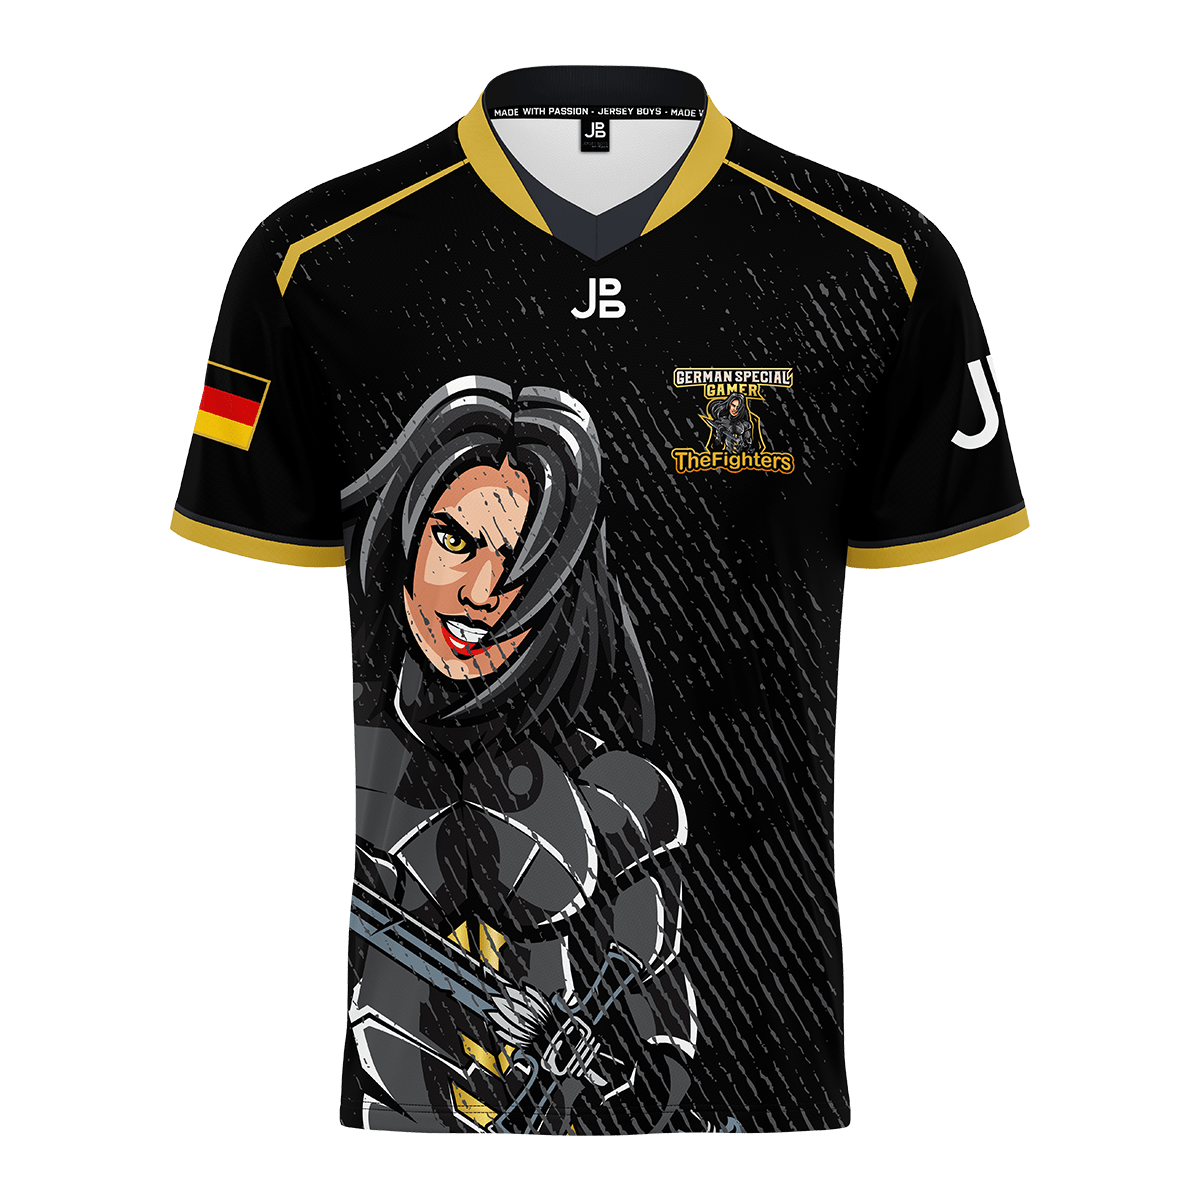 GERMAN SPECIAL GAMER - THE FIGHTERS - Jersey 2021